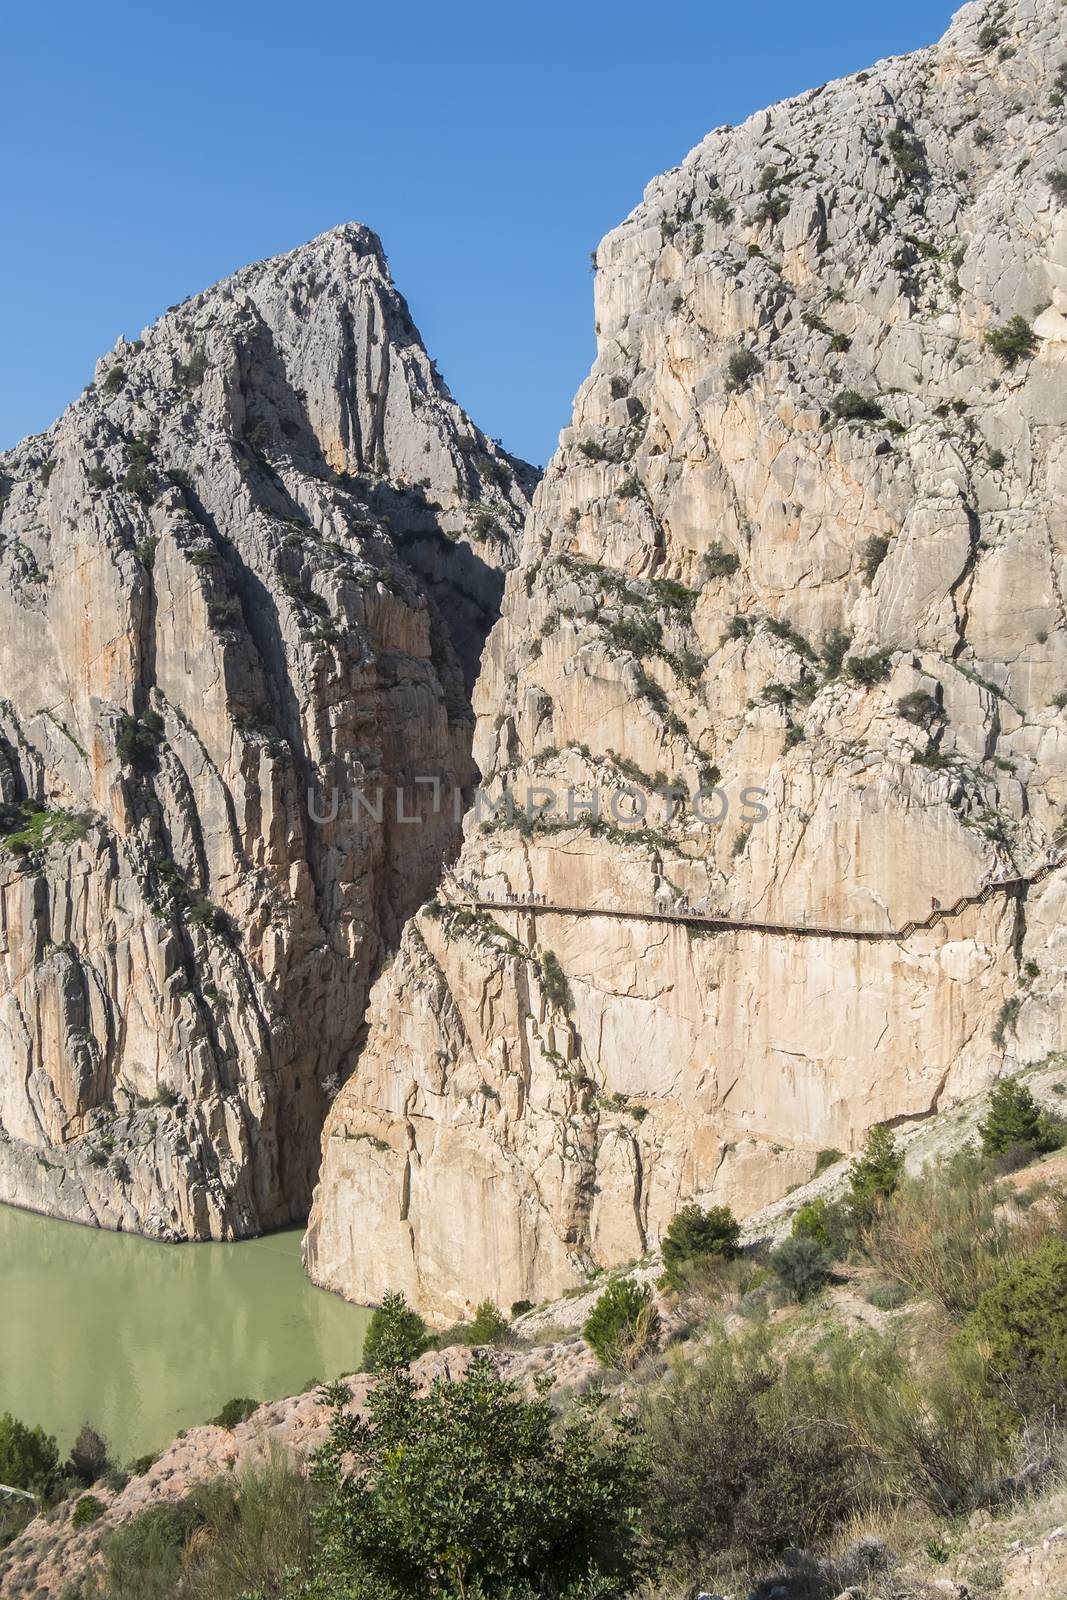  'El Caminito del Rey' (King's Little Path), World's Most Dangerous Footpath reopened in May 2015. Ardales (Malaga), Spain.